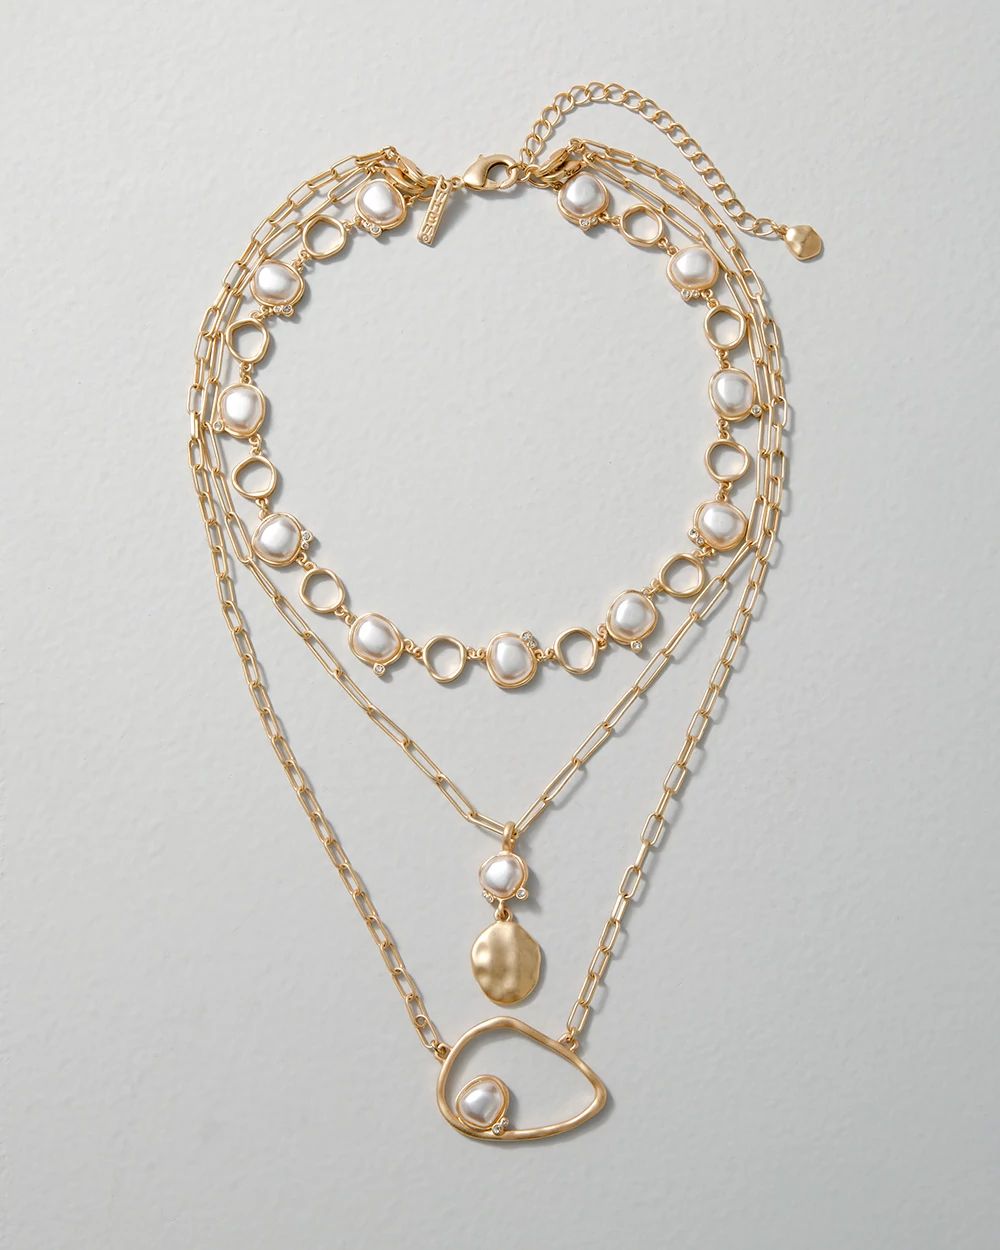 Goldtone Faux Pearl Multi-Strand Short Necklace click to view larger image.